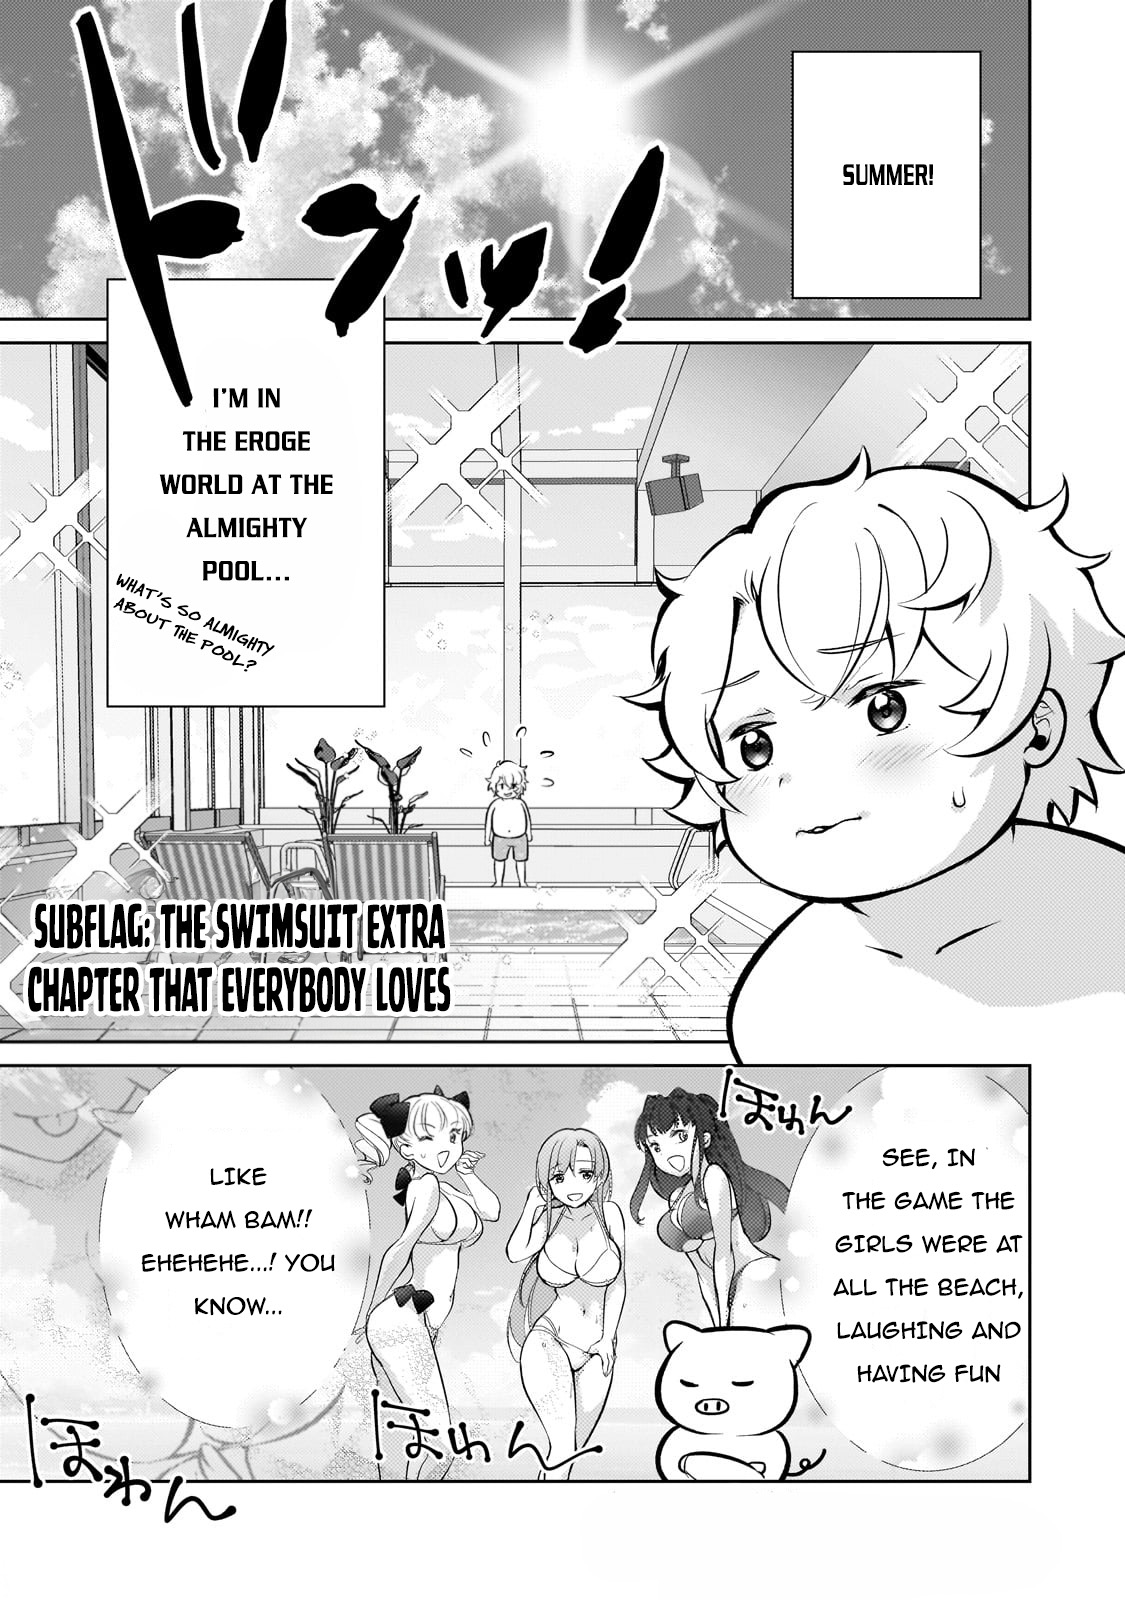 Reincarnation To The World Of “Eroge”: The Story About Lazy Aristocrat Who Struggle For Resist His Destiny Chapter 9.5: The Swimsuit Extra Chapter That Everbody Loves - Picture 1